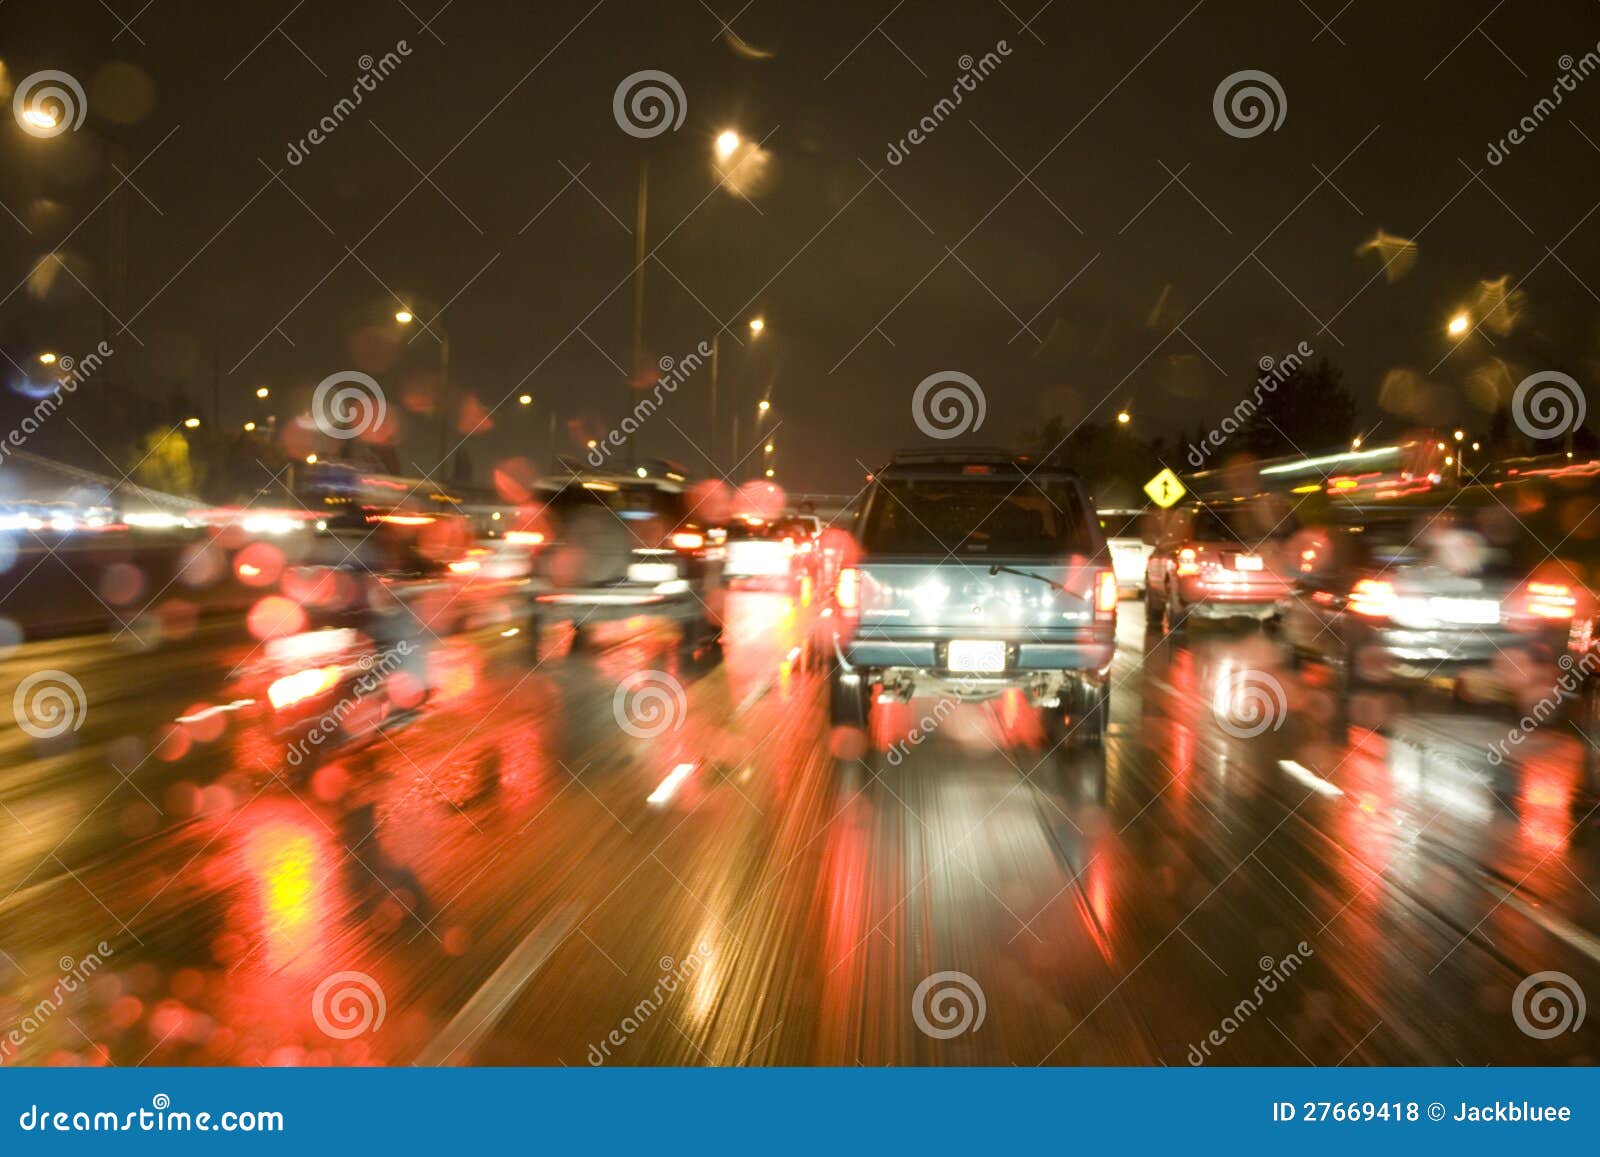 driving in the rain on freeway at night